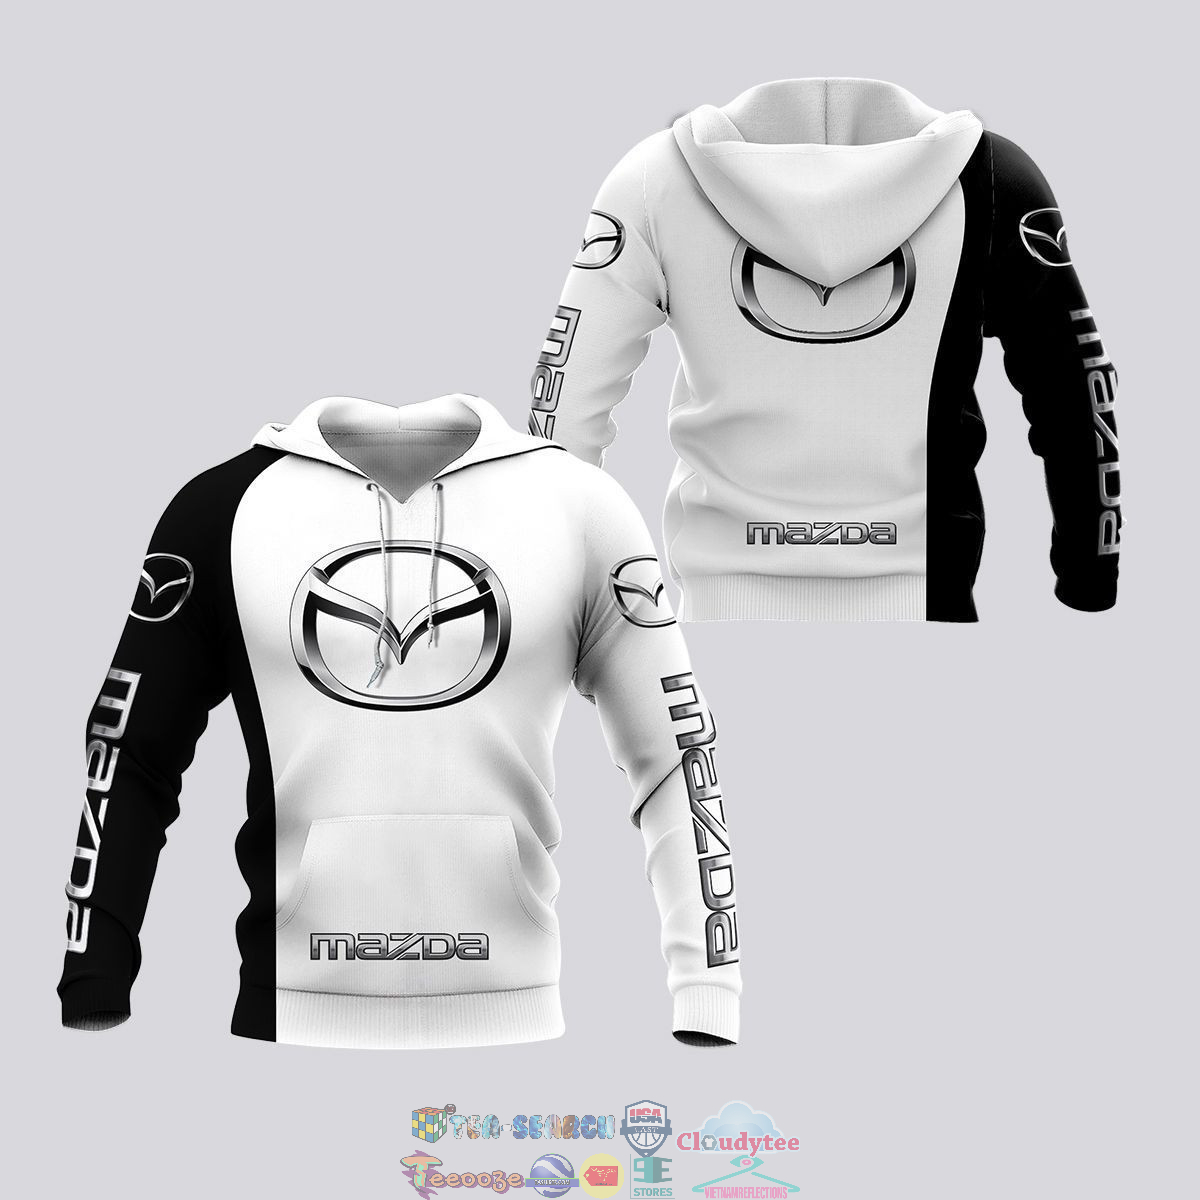 Mazda ver 13 3D hoodie and t-shirt